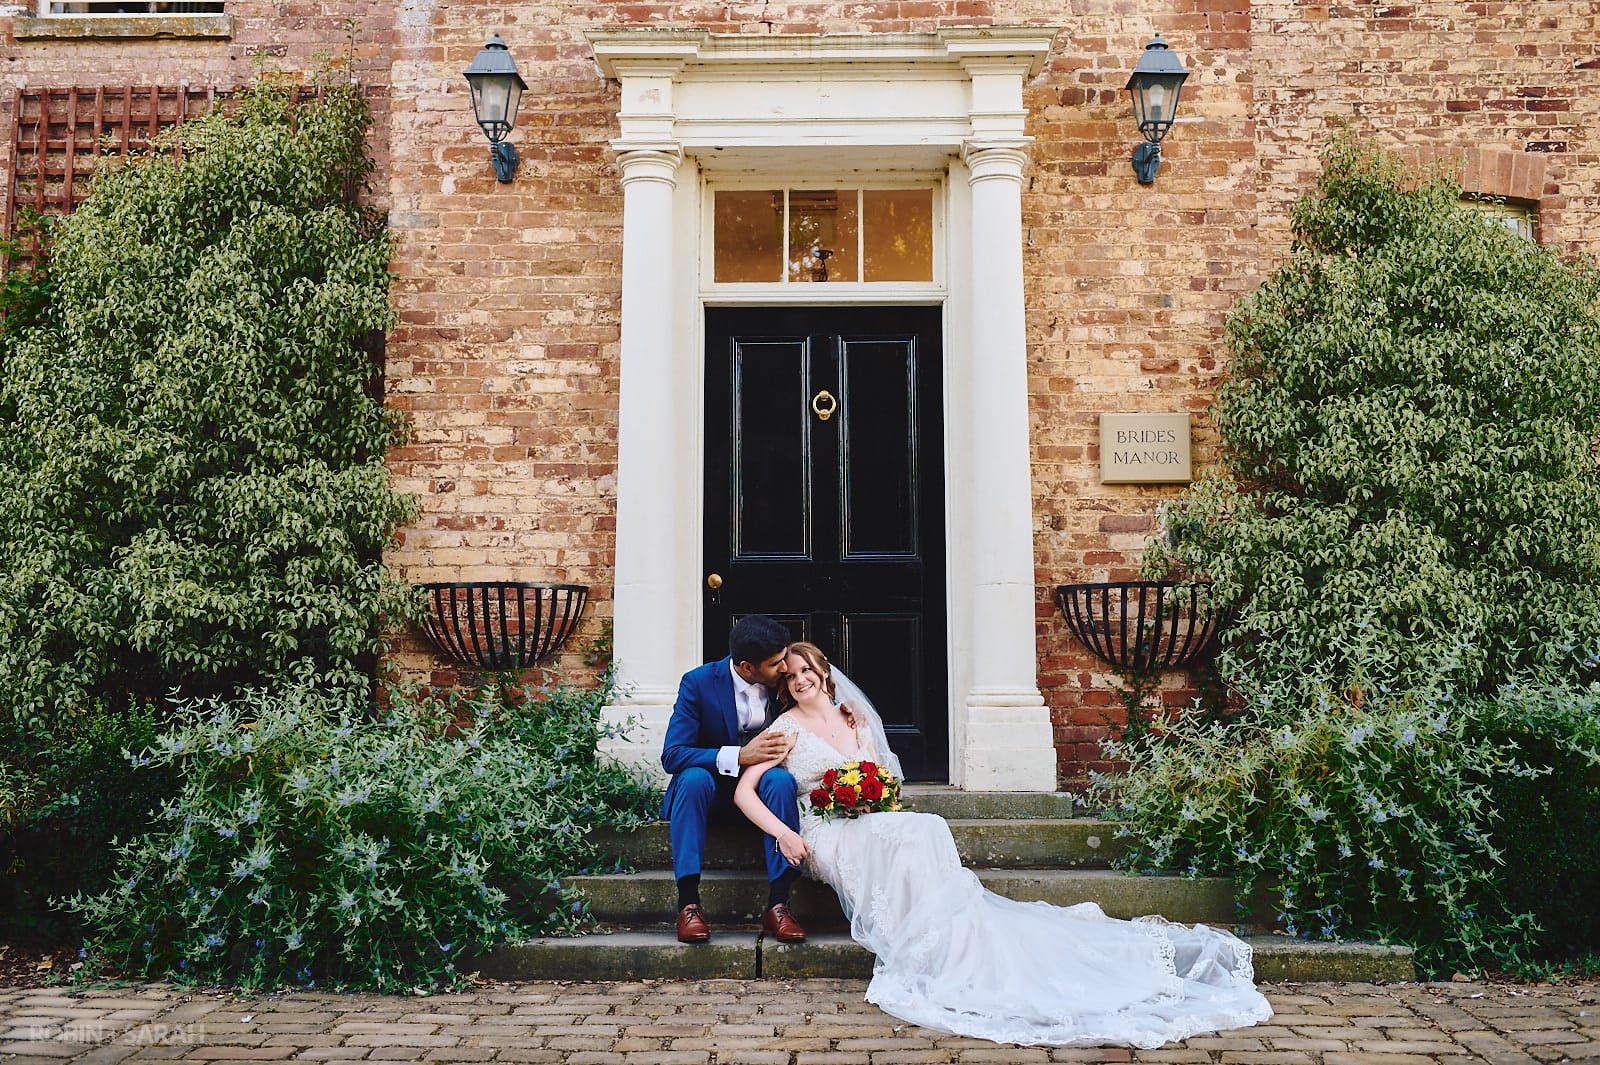 Bride and groom sitting on step and surrounded by beautiful gardens